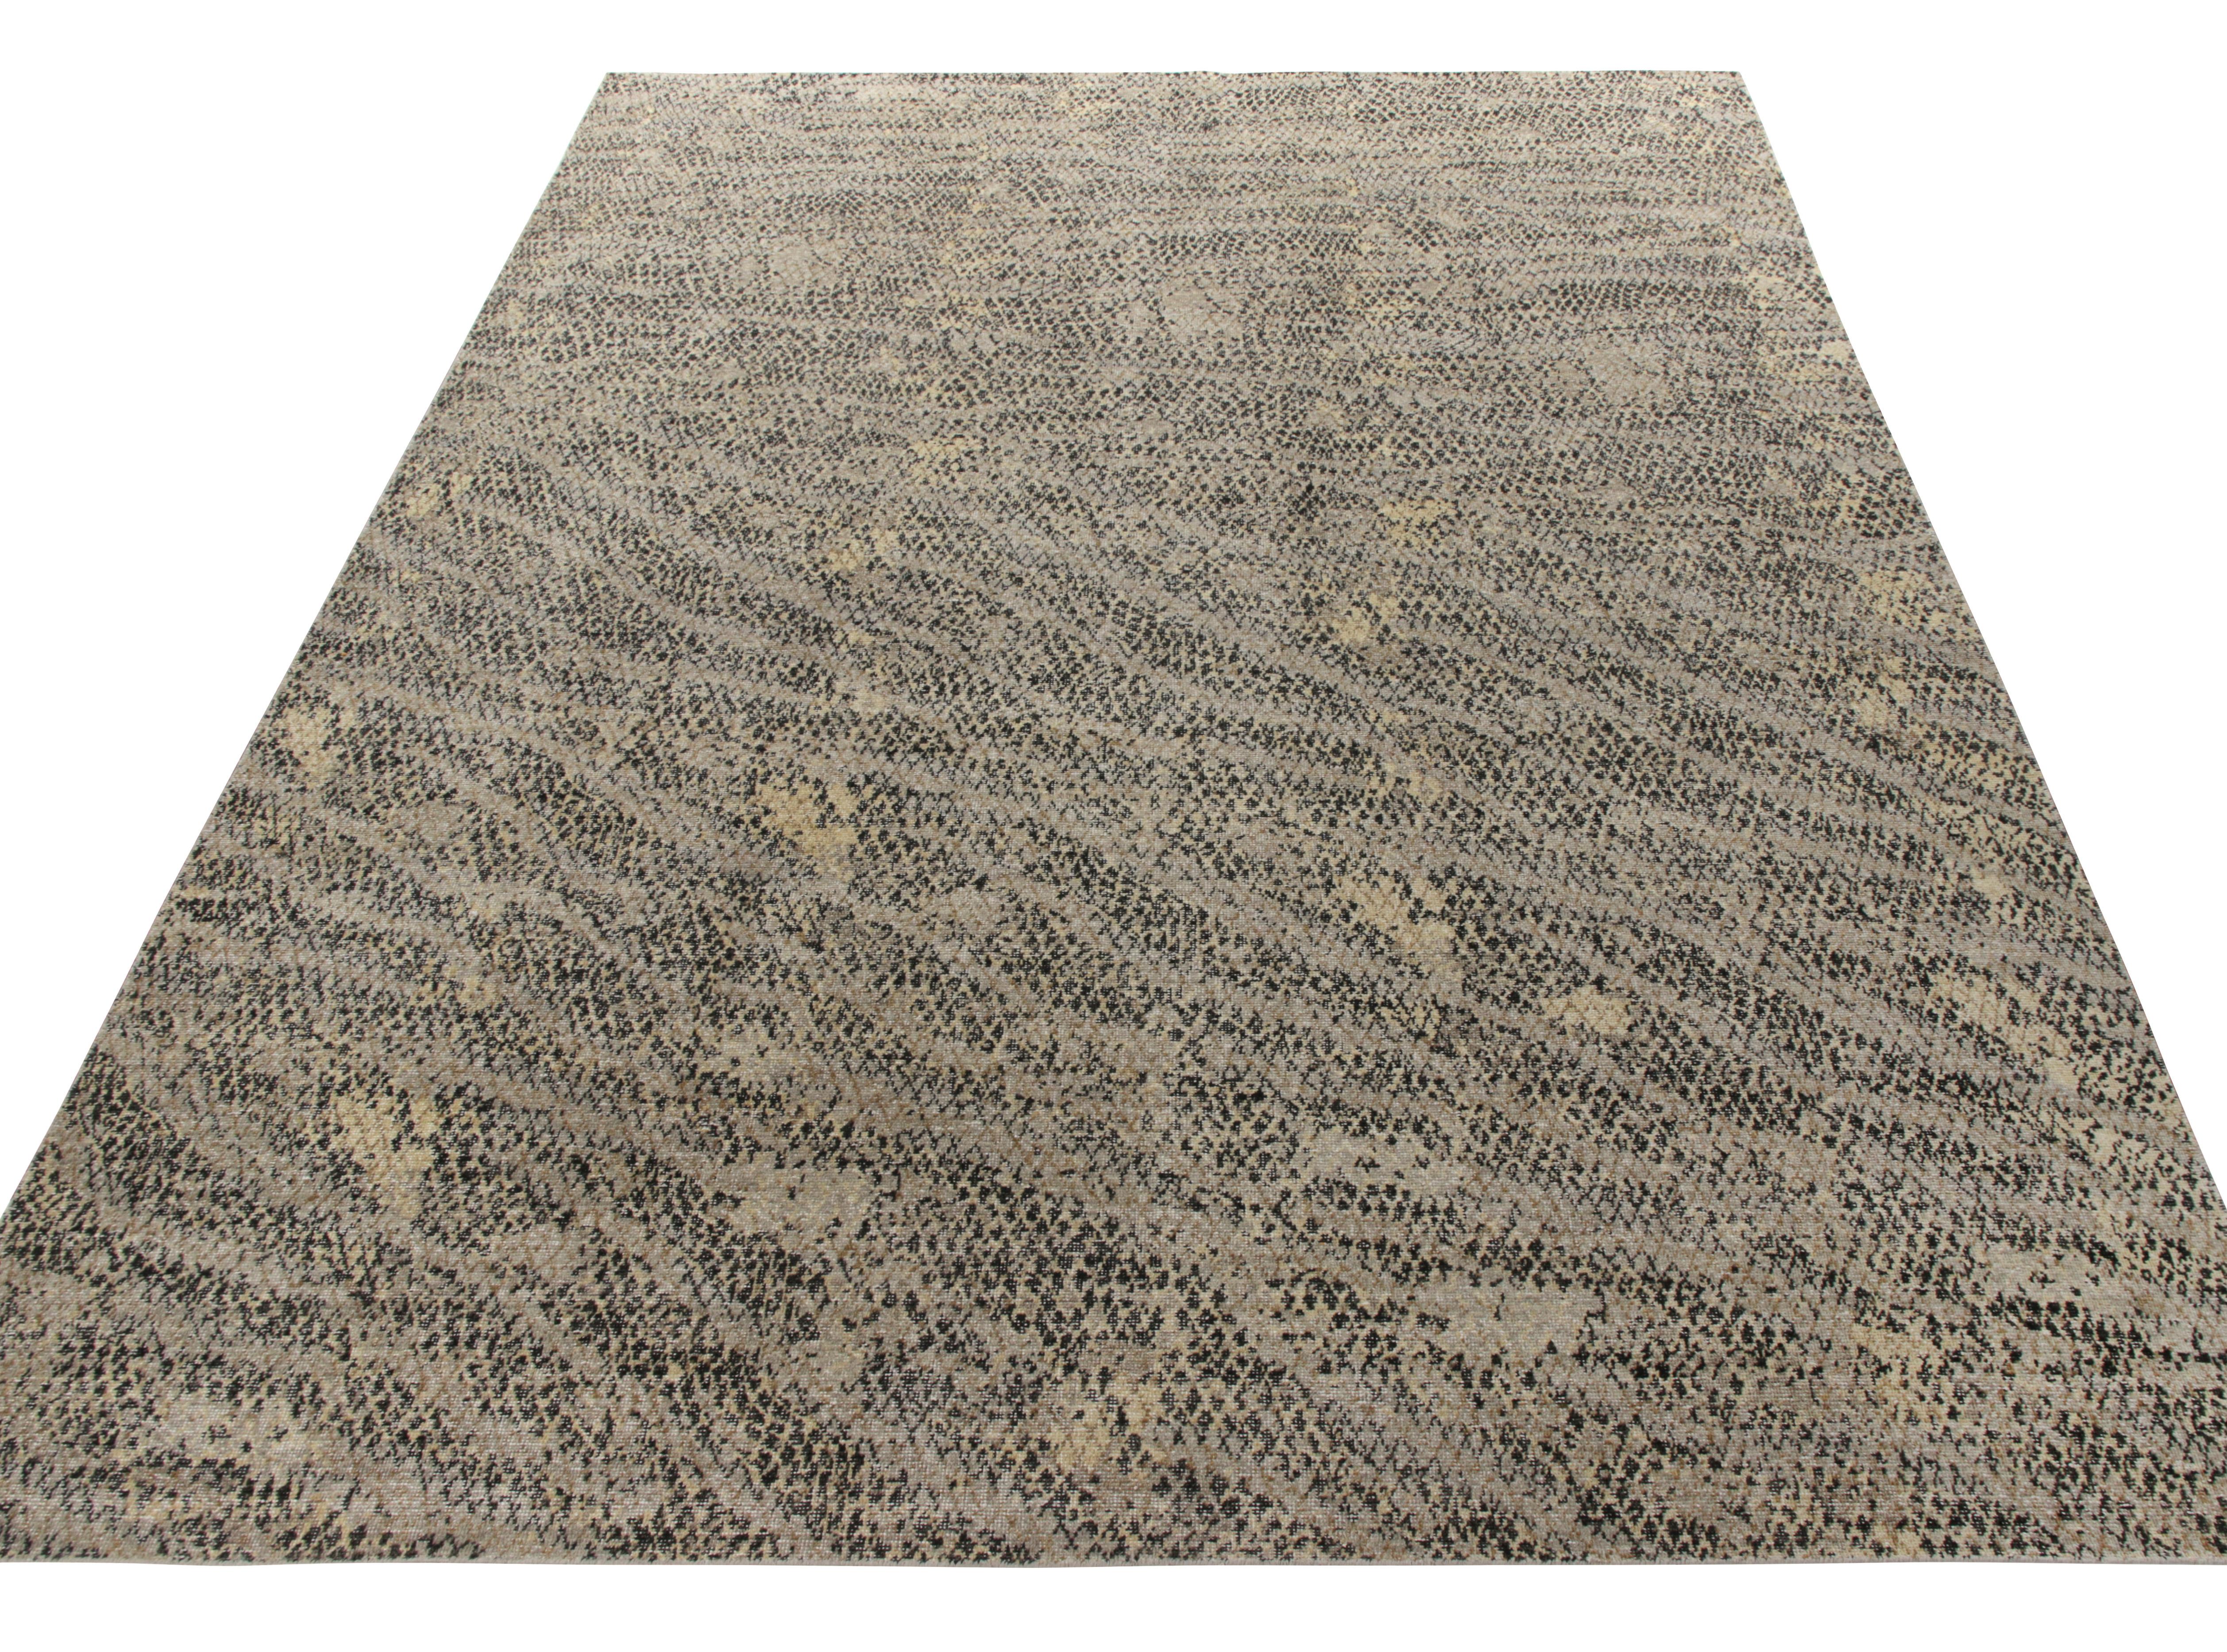 A 10x14 hand-knotted rug in distressed style from Rug & Kilim’s Homage Collection. This modern frame carries the hallmark traits of our Dots line where a meticulous dotted pattern flourishes across the weave in a delicious beige-brown, gray and